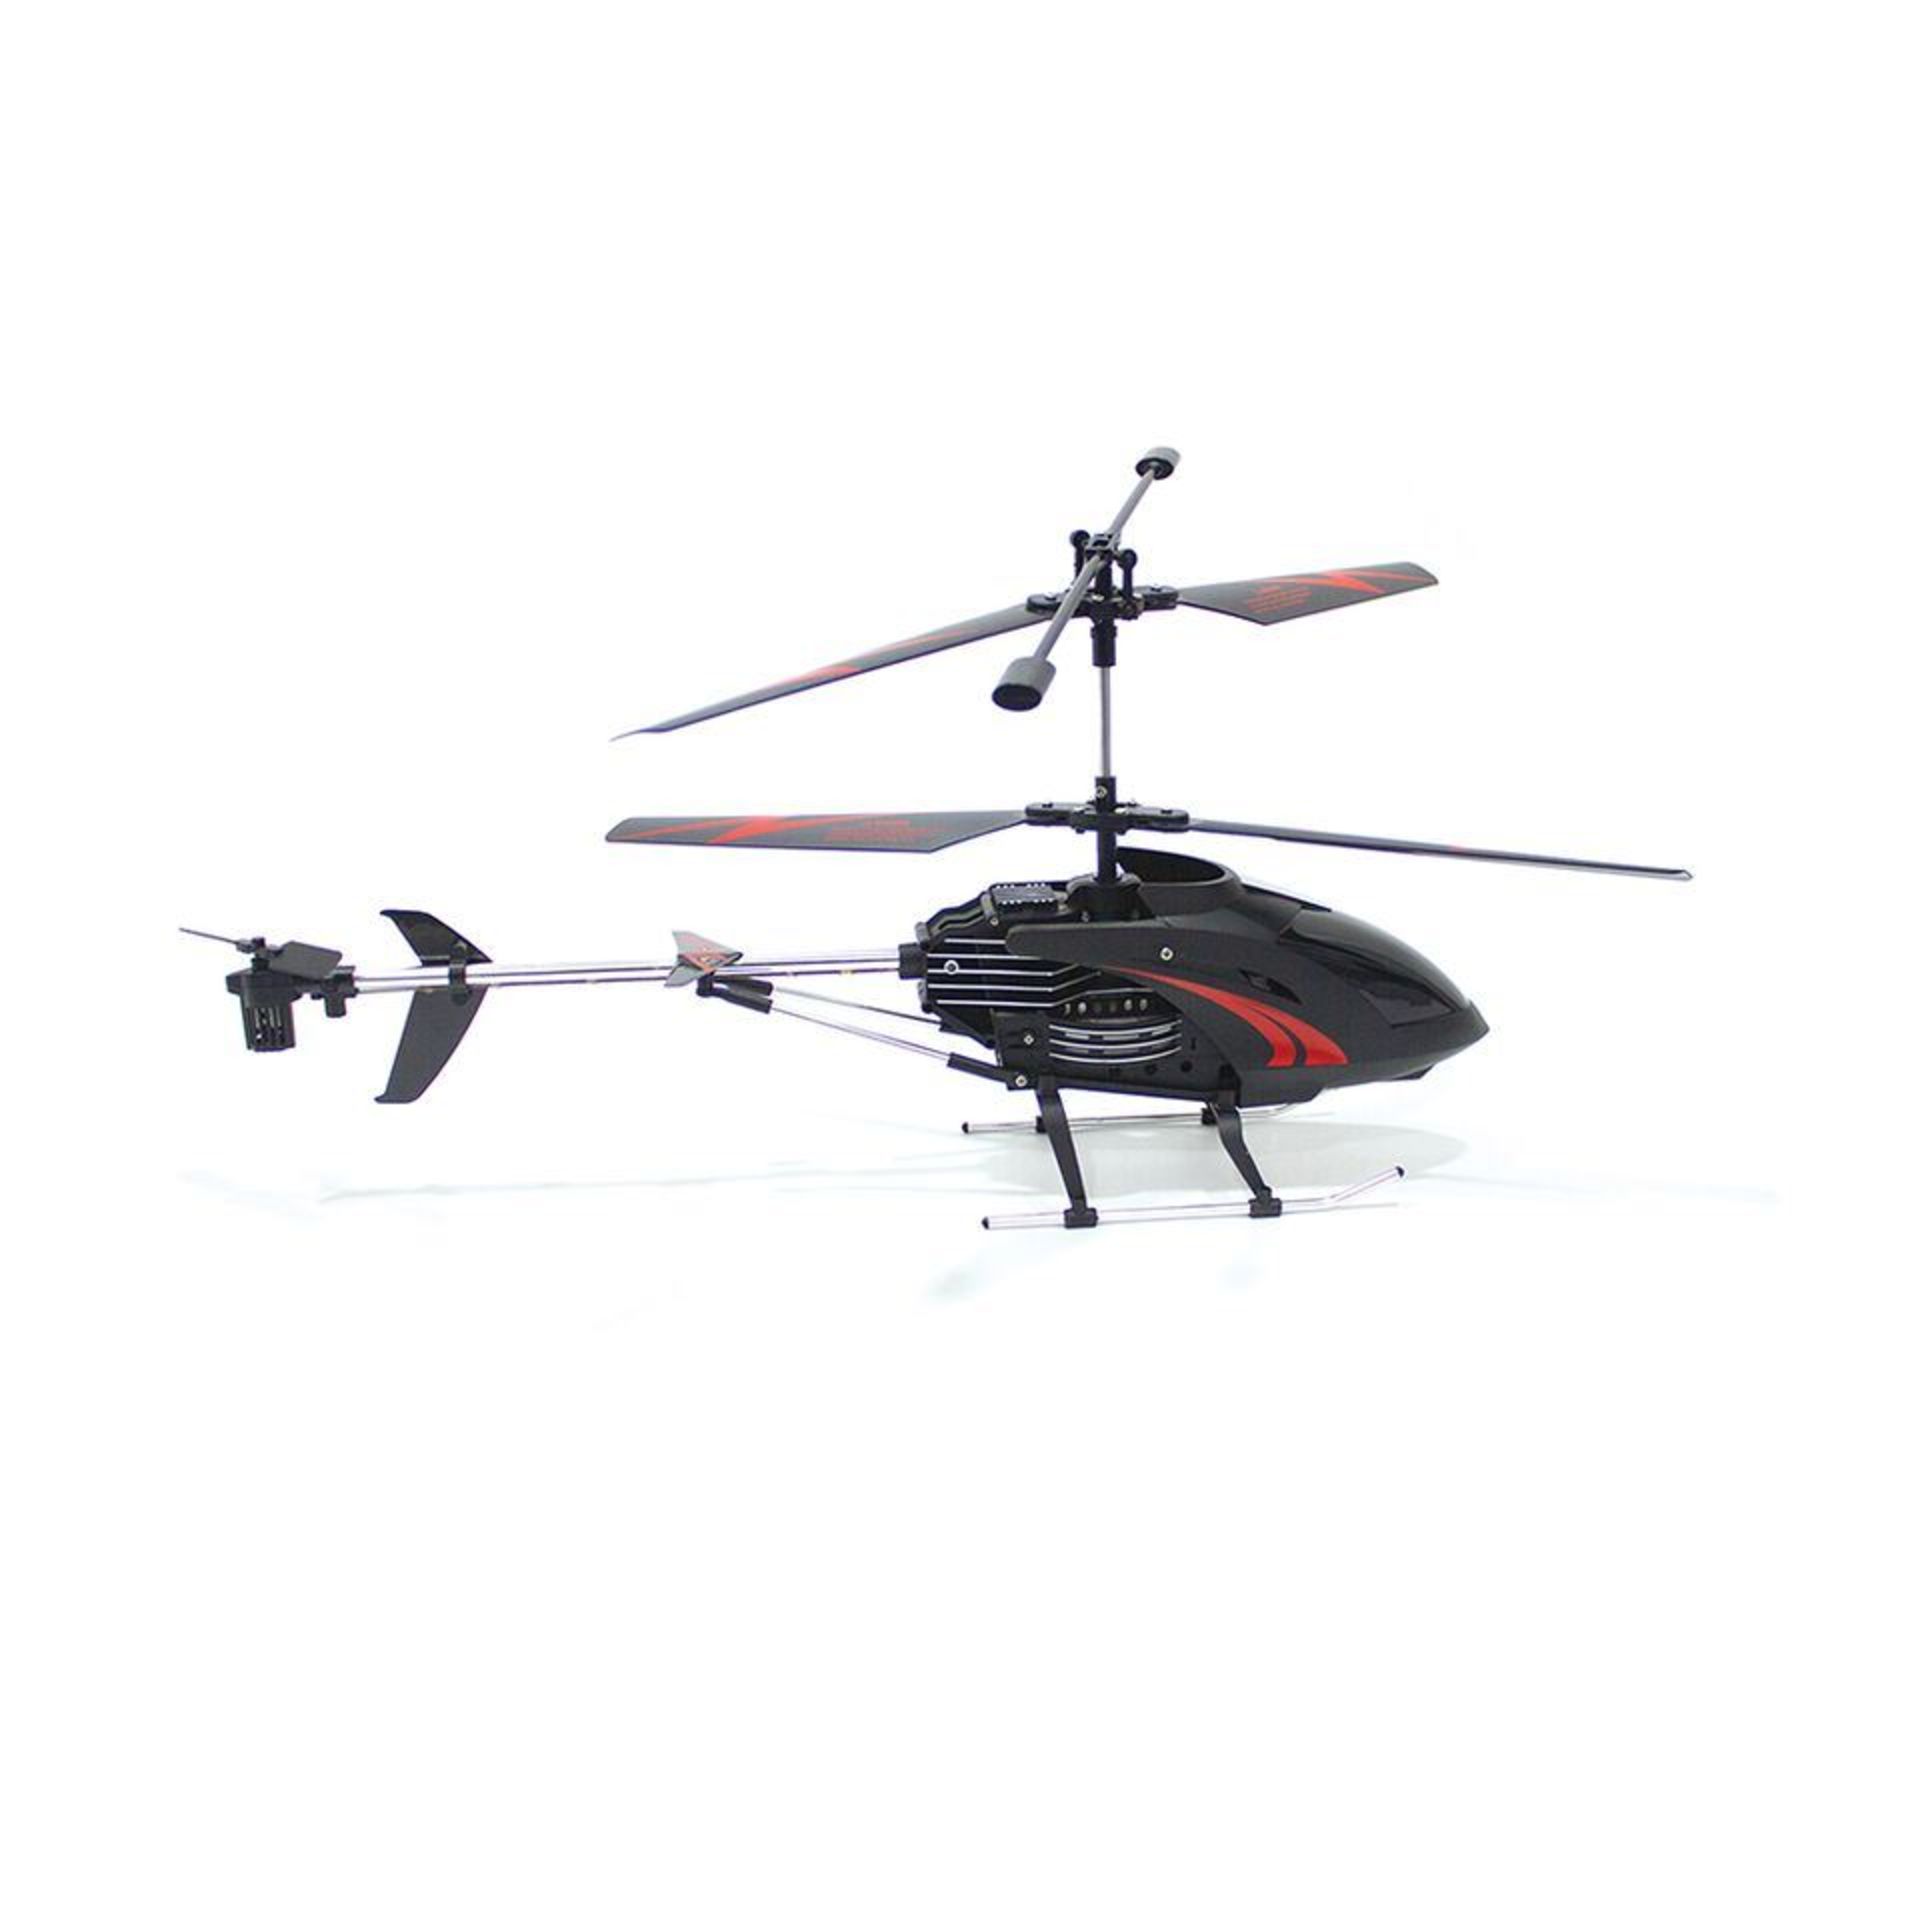 V Brand New Toughcopter 3.5 Channel R/C Helicopter With 3.0 Channel - Drable Body & Fuselage - LED